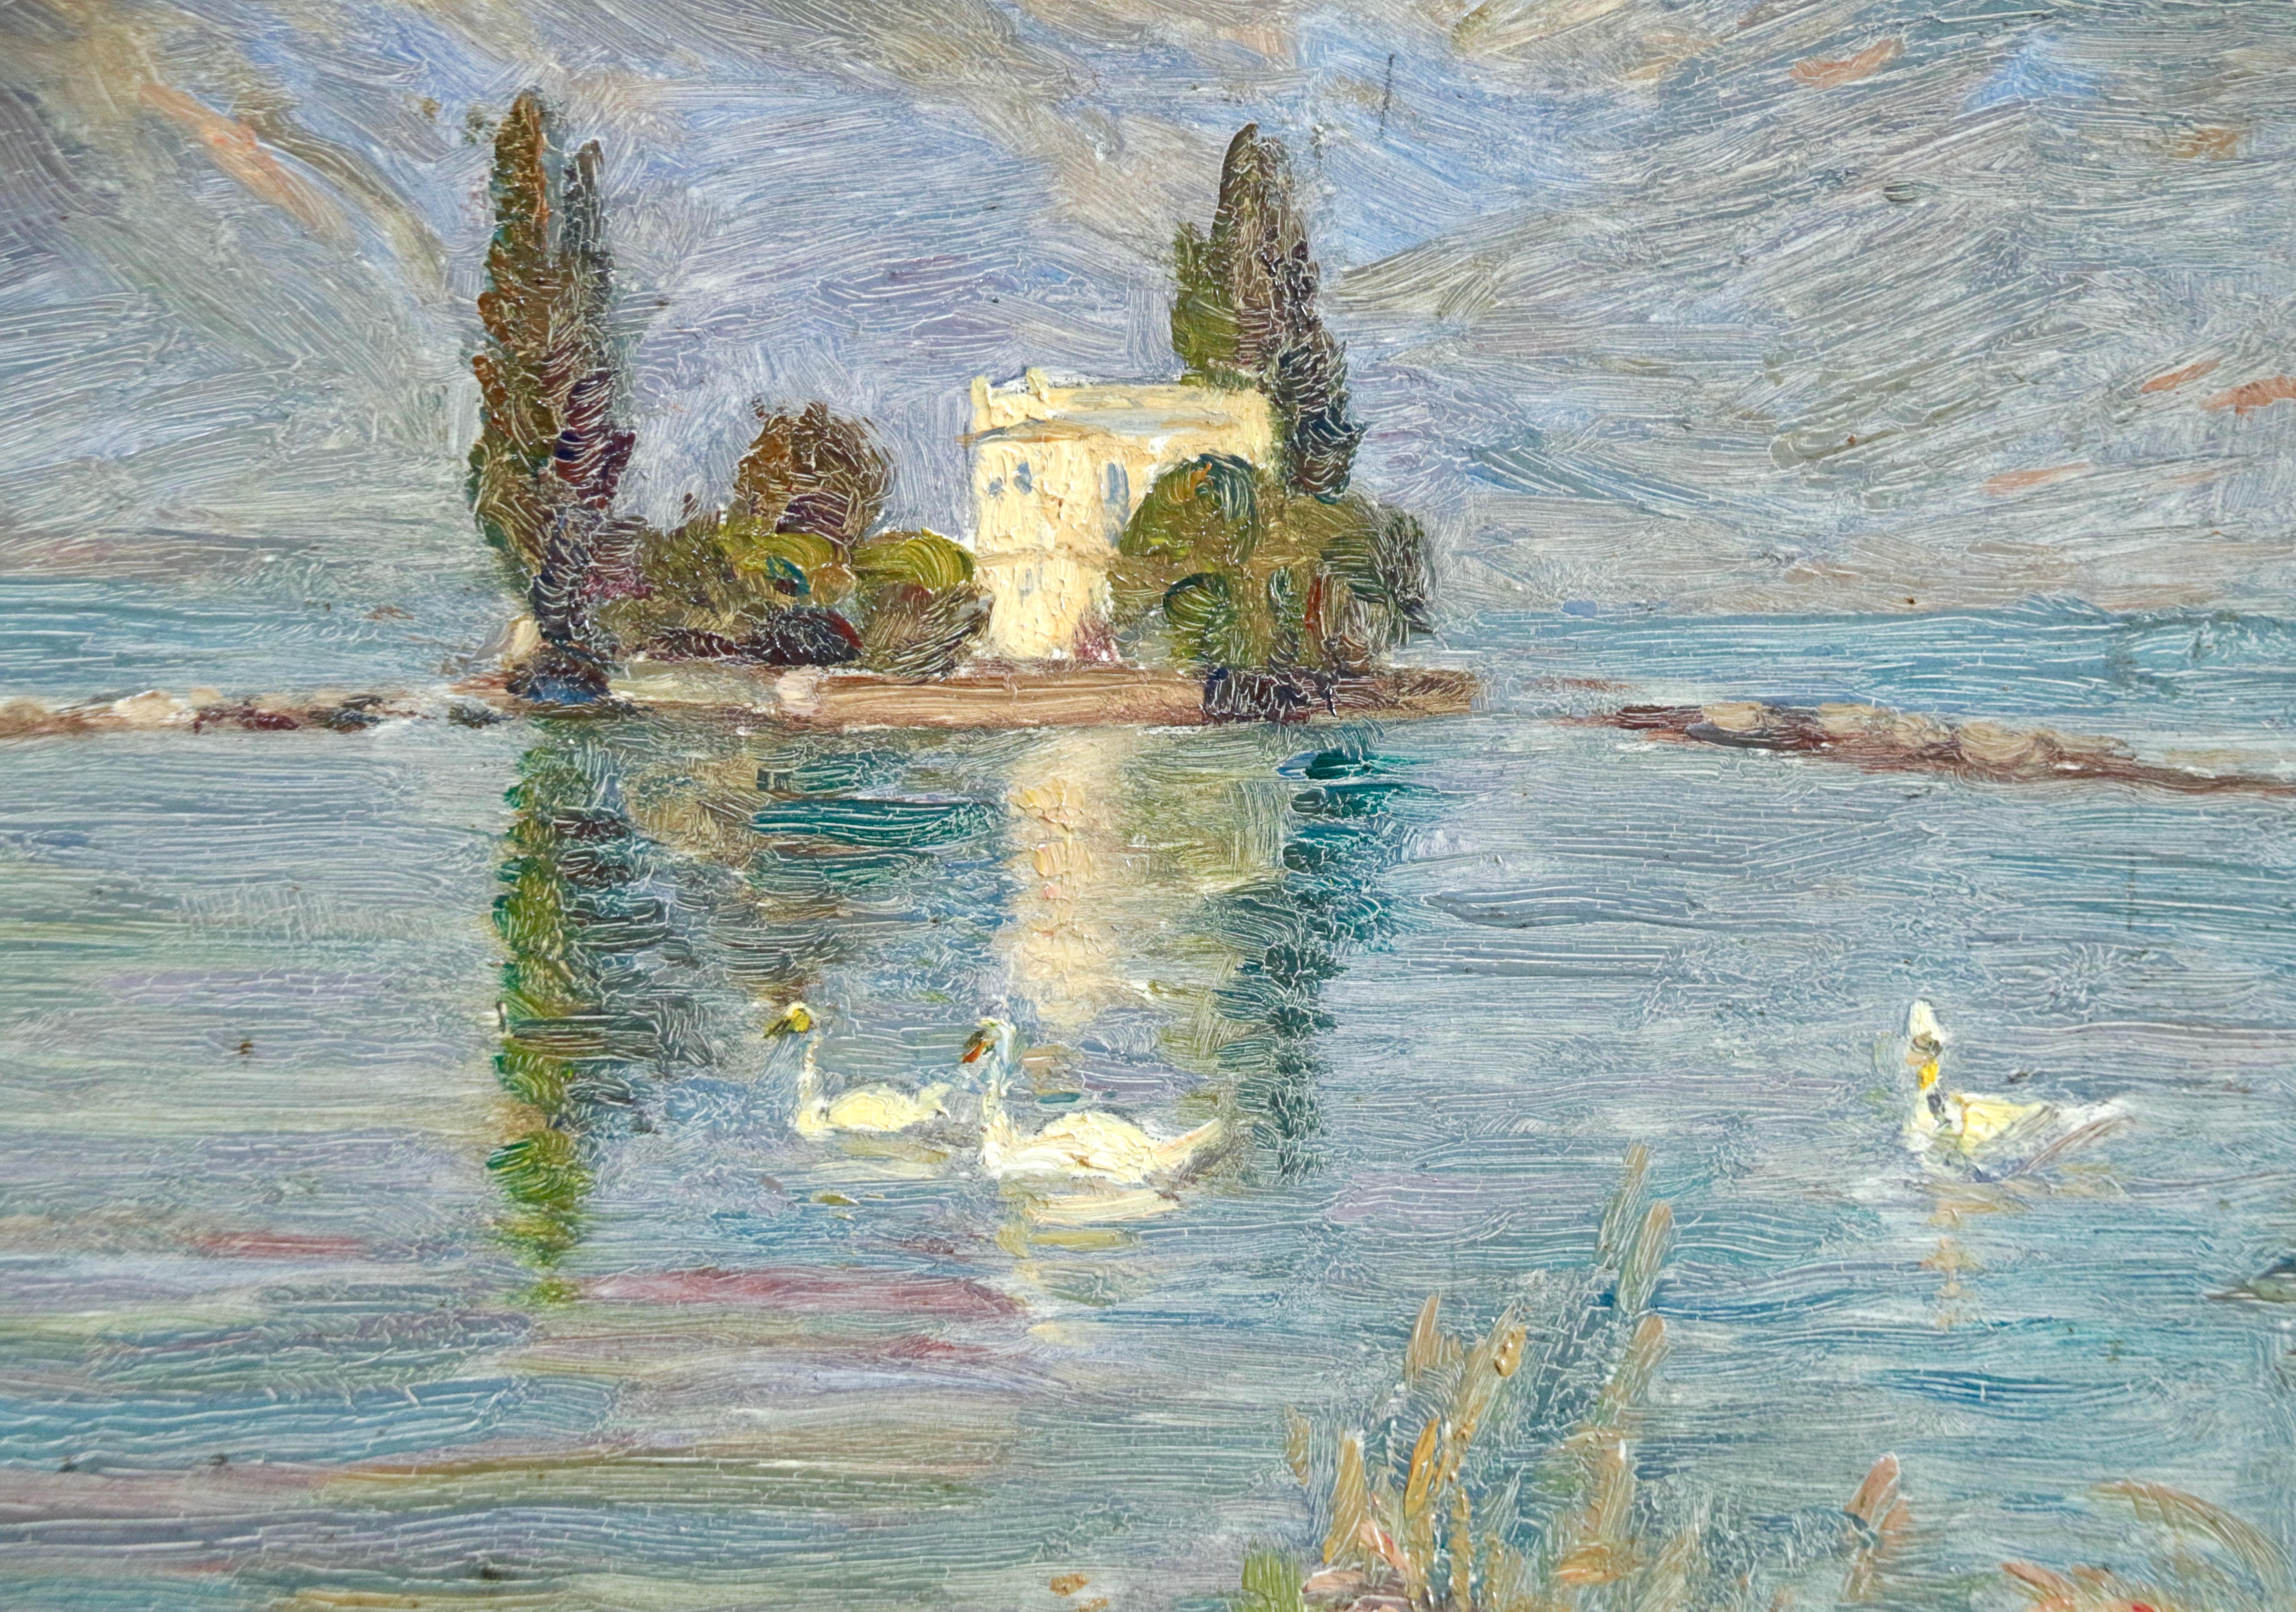 Signed and dated 1911 impressionist oil on panel by French painter Henri Duhem. This beautiful work depicts a view of Lake Montreux in Switzerland with white swans contrasting against the still blue water and a view of the mountains